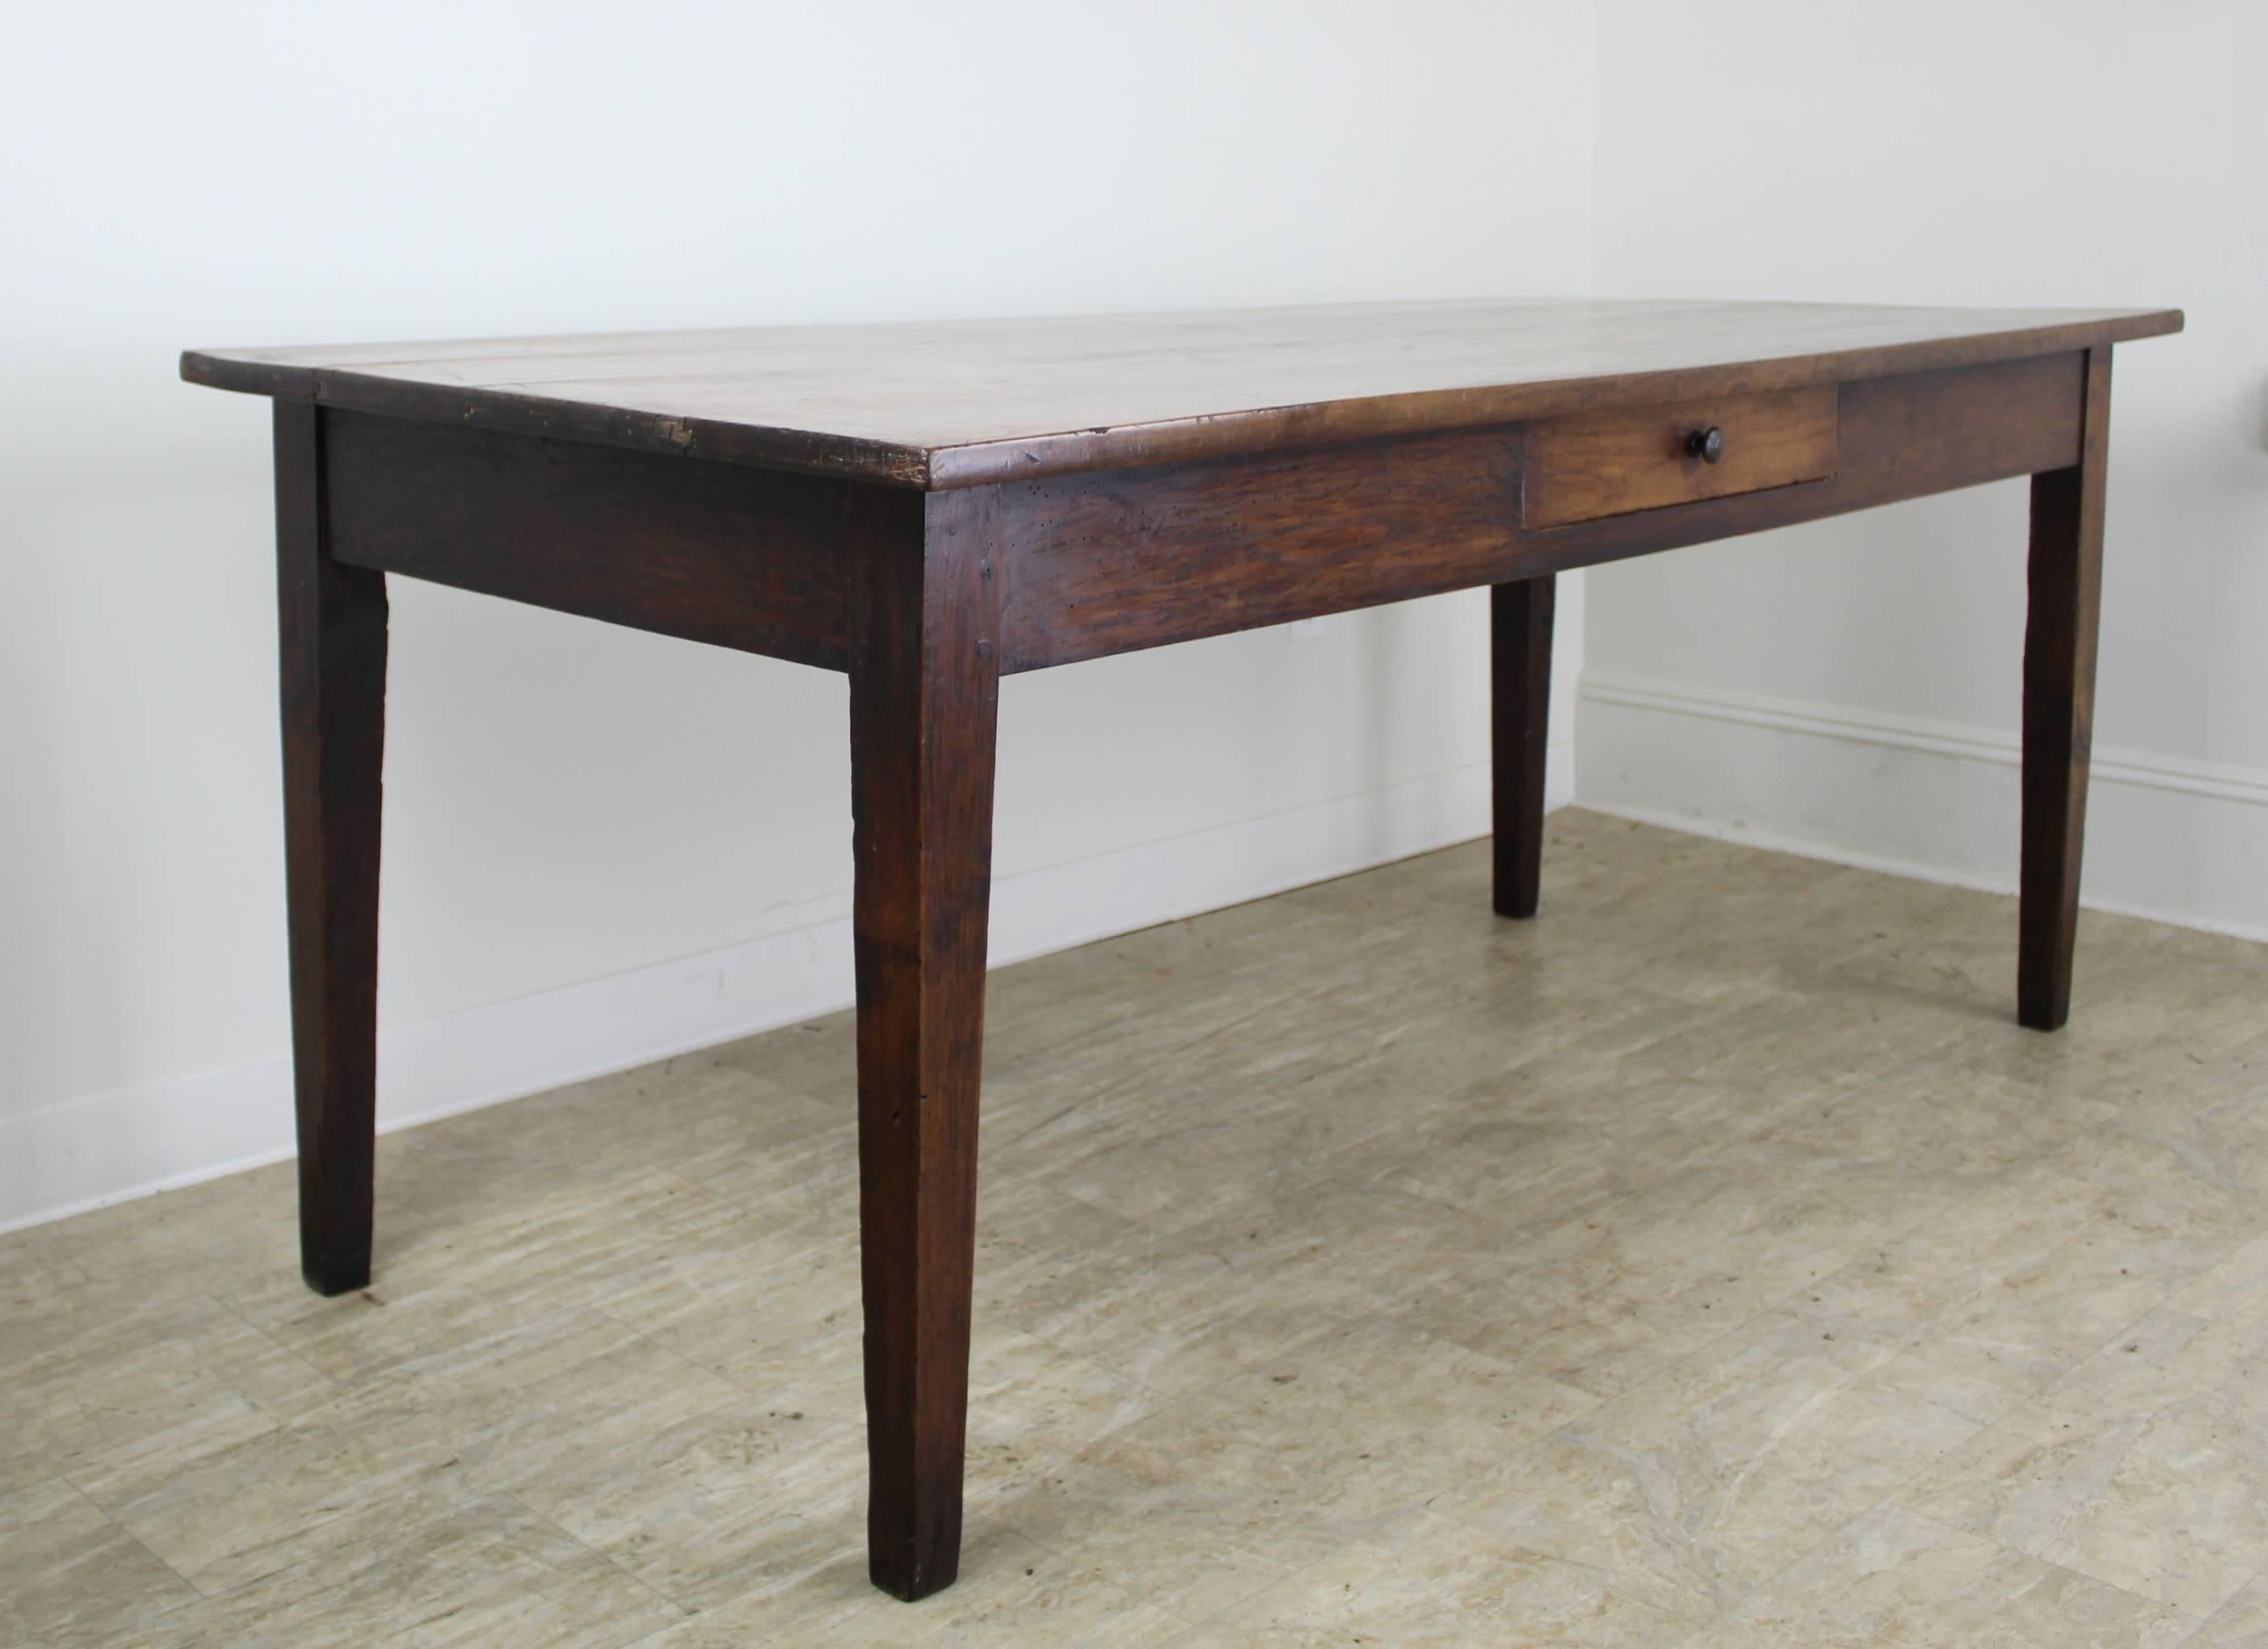 A smaller cherry farm or dining table with a thick top. The color and patina are very good, with a warm glow. 24 inch apron height is good for knees, and there are 63 inches between the legs on the long side.